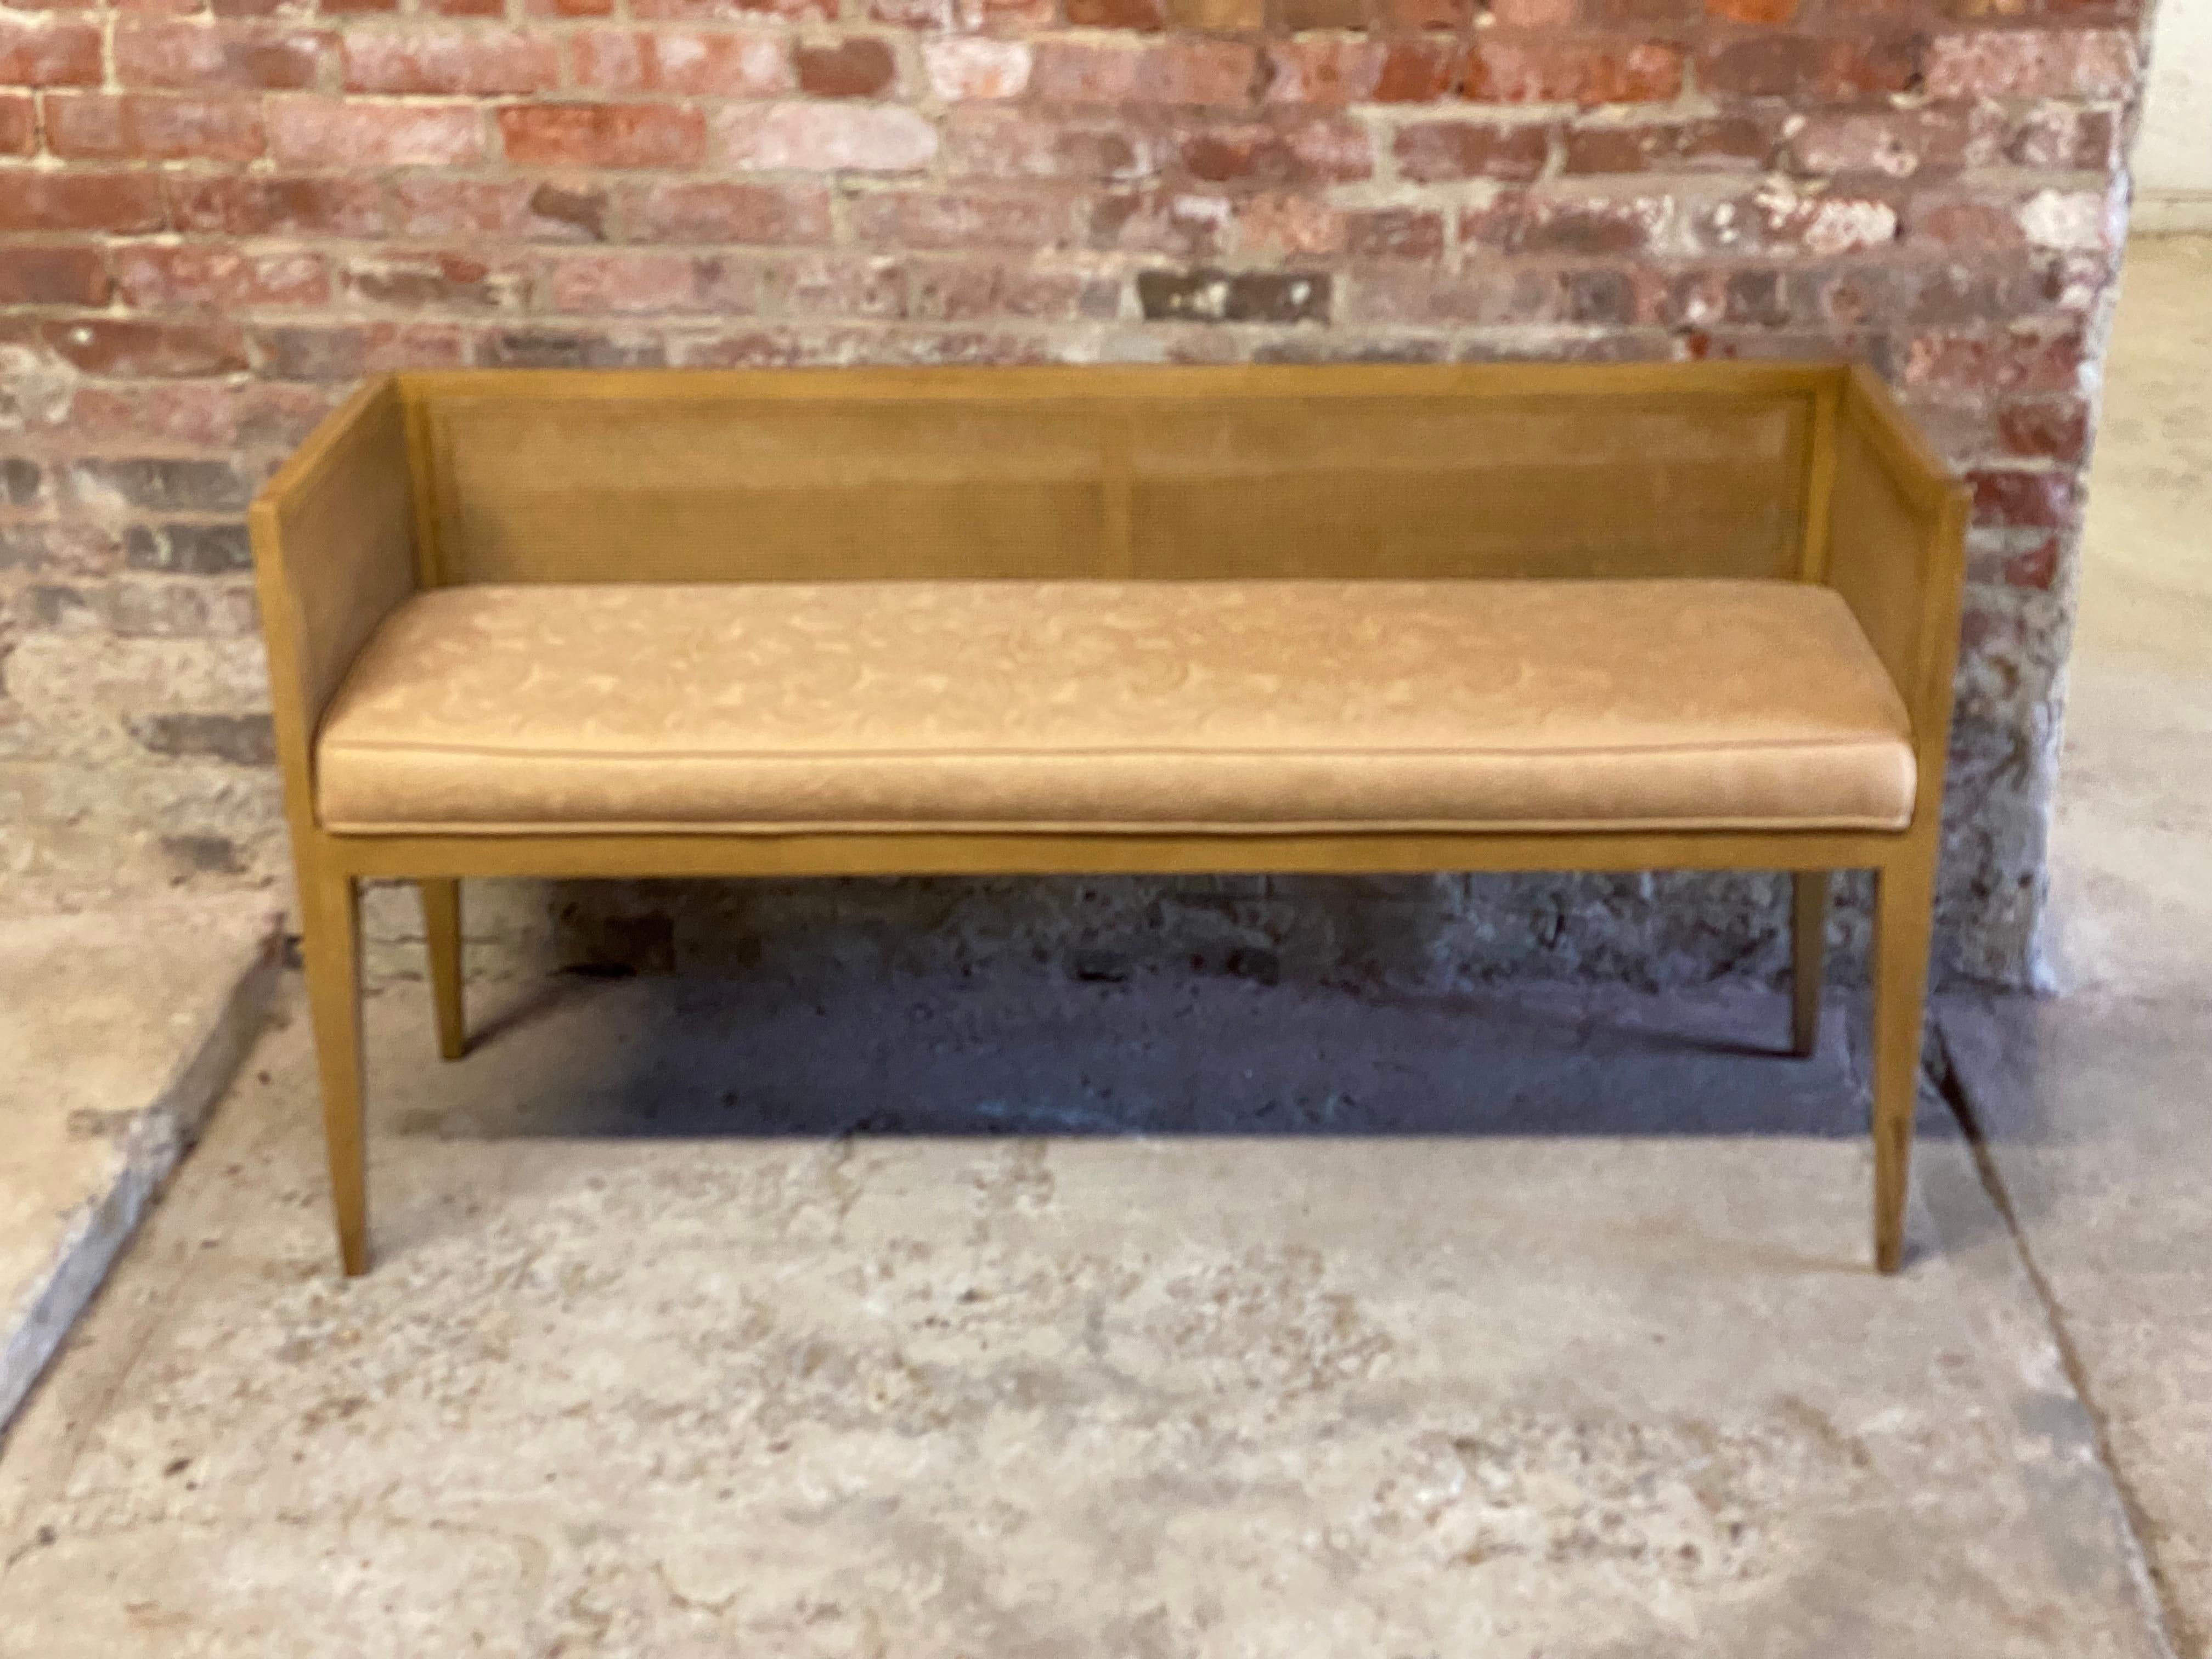 Mid-Century Modern mahogany and caned bench. The perfect seating solution for anywhere in the home or office. Placed at the foot of the bed, foyer, window seat or waiting room. The bench features solid mahogany construction, with caned back and side